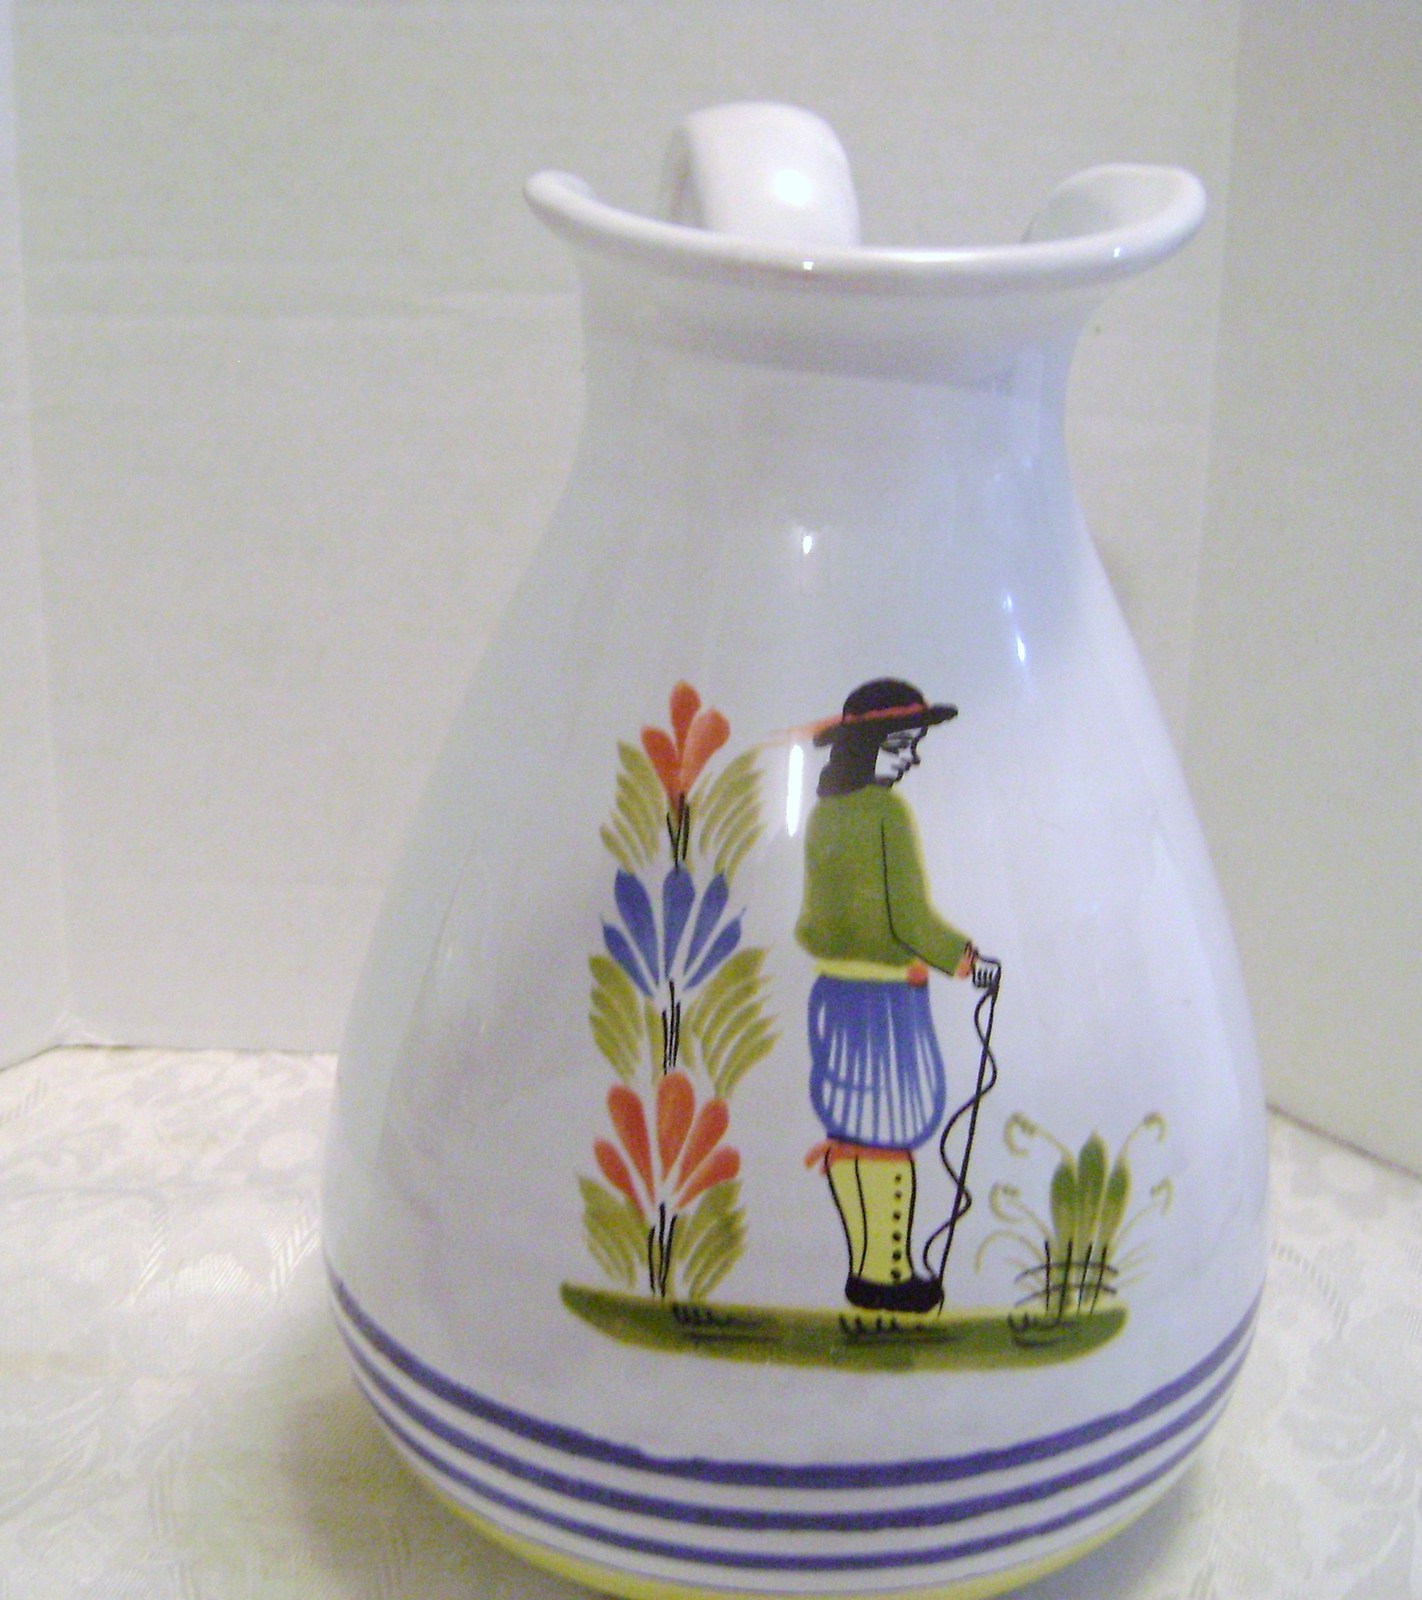 Wide Mouth Ceramic Italian Pitcher with vintage Design - $16.00